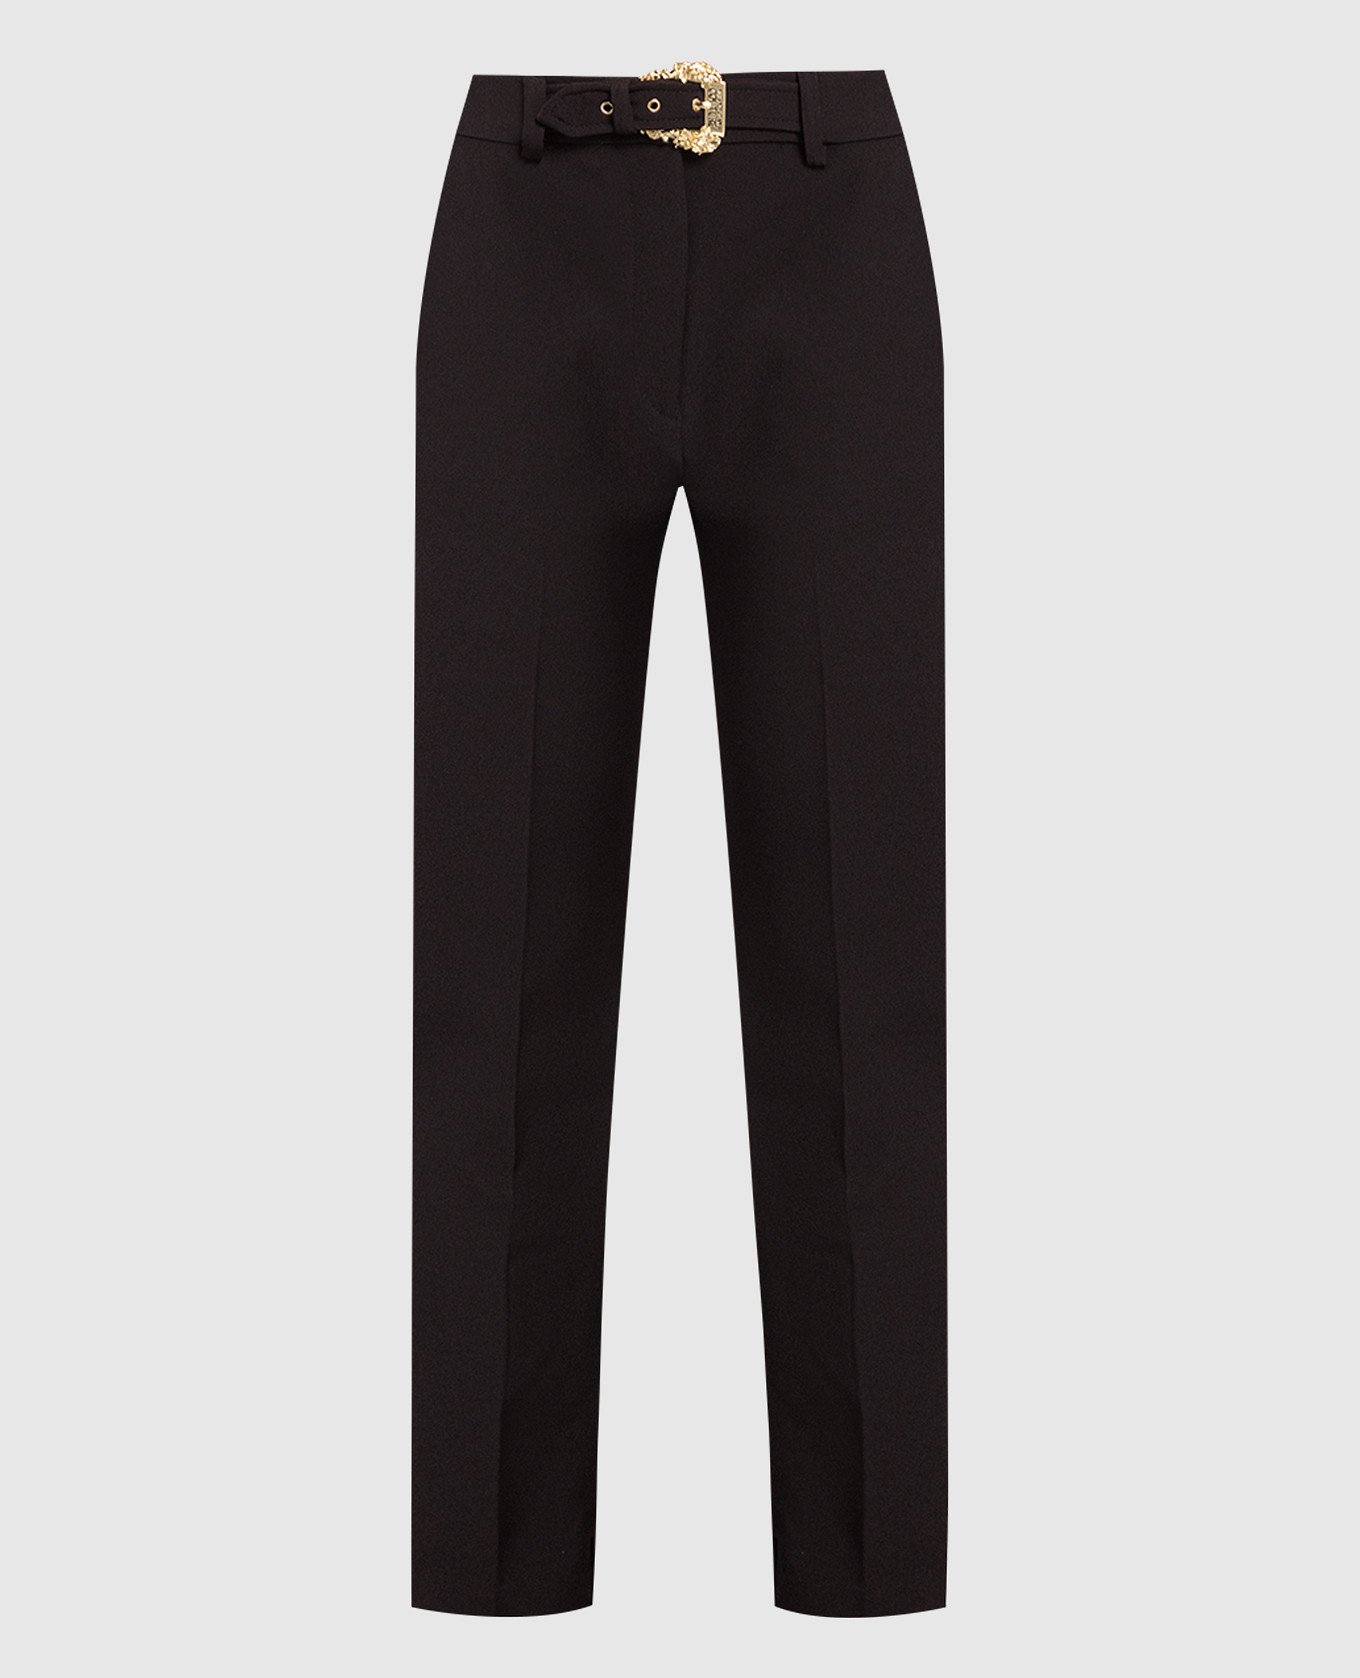 Black chinos with a baroque buckle